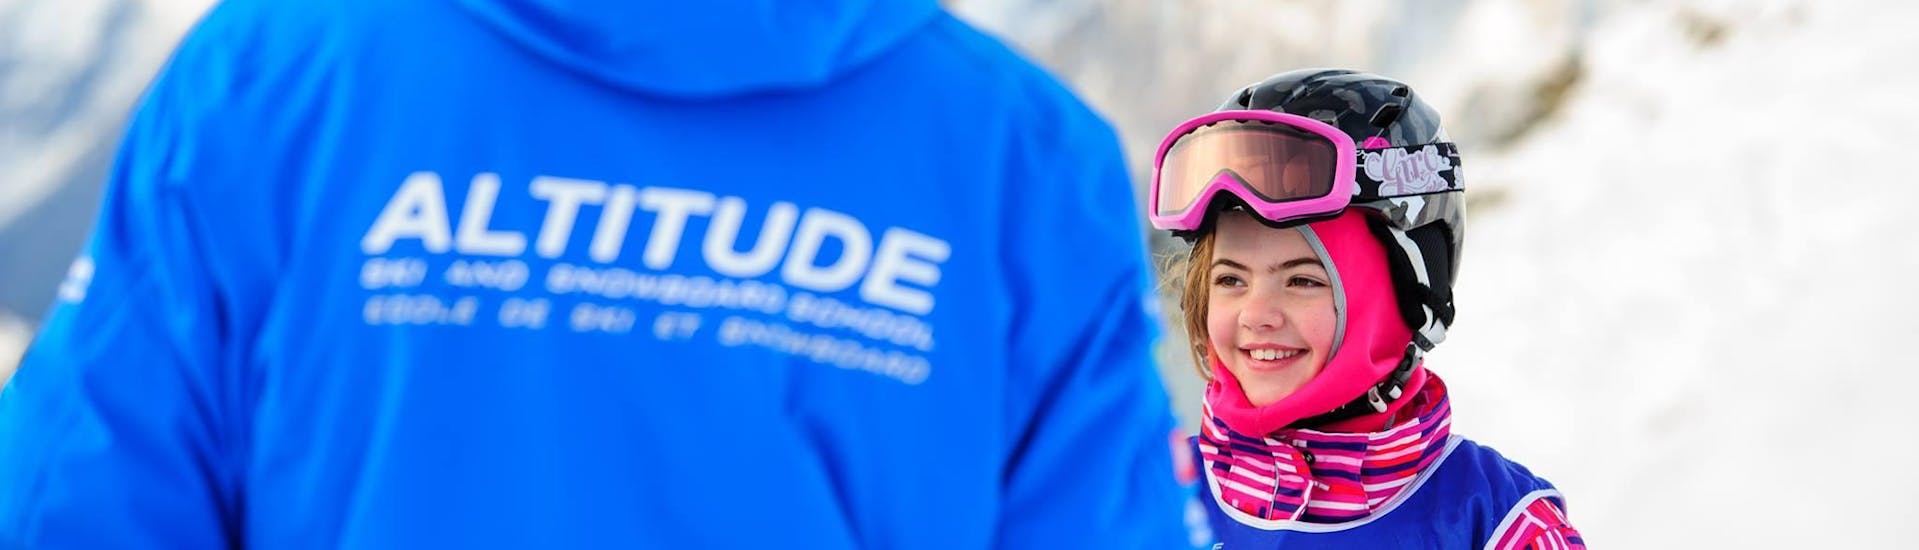 Private Ski Lessons for Kids of All Ages in Verbier with Altitude Ski School Verbier &amp; Gstaad - Hero image